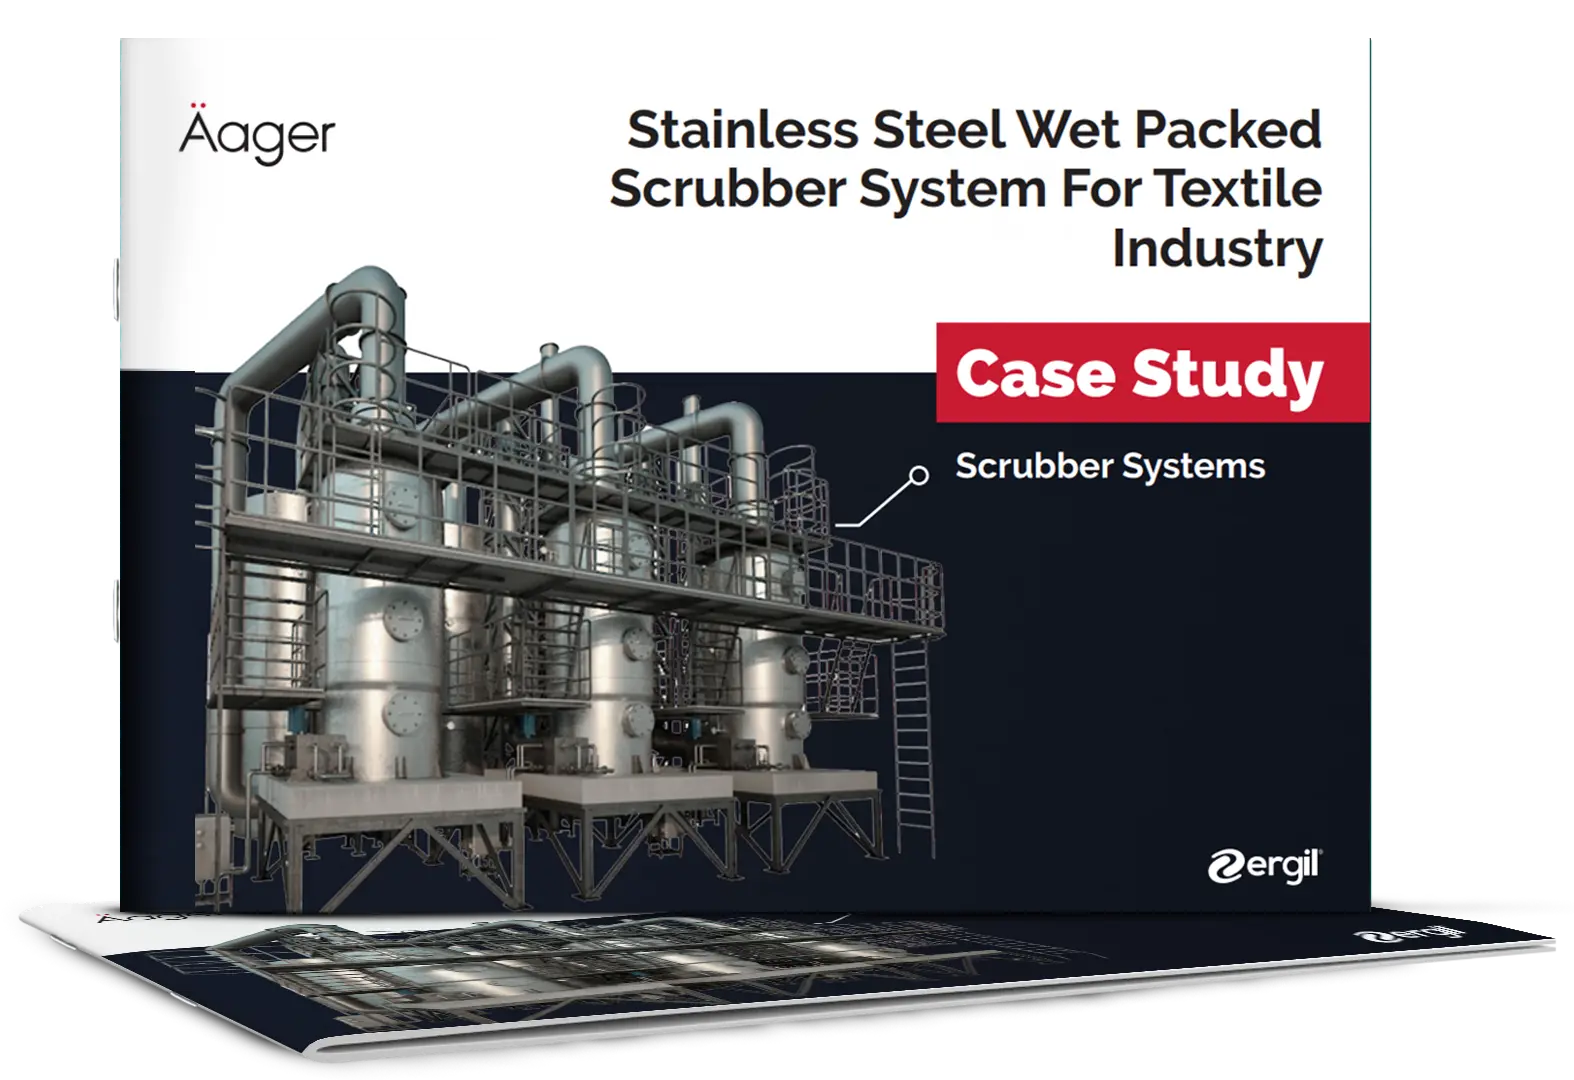 Stainless Steel Wet Packed Scrubber System for Textile Industry 40